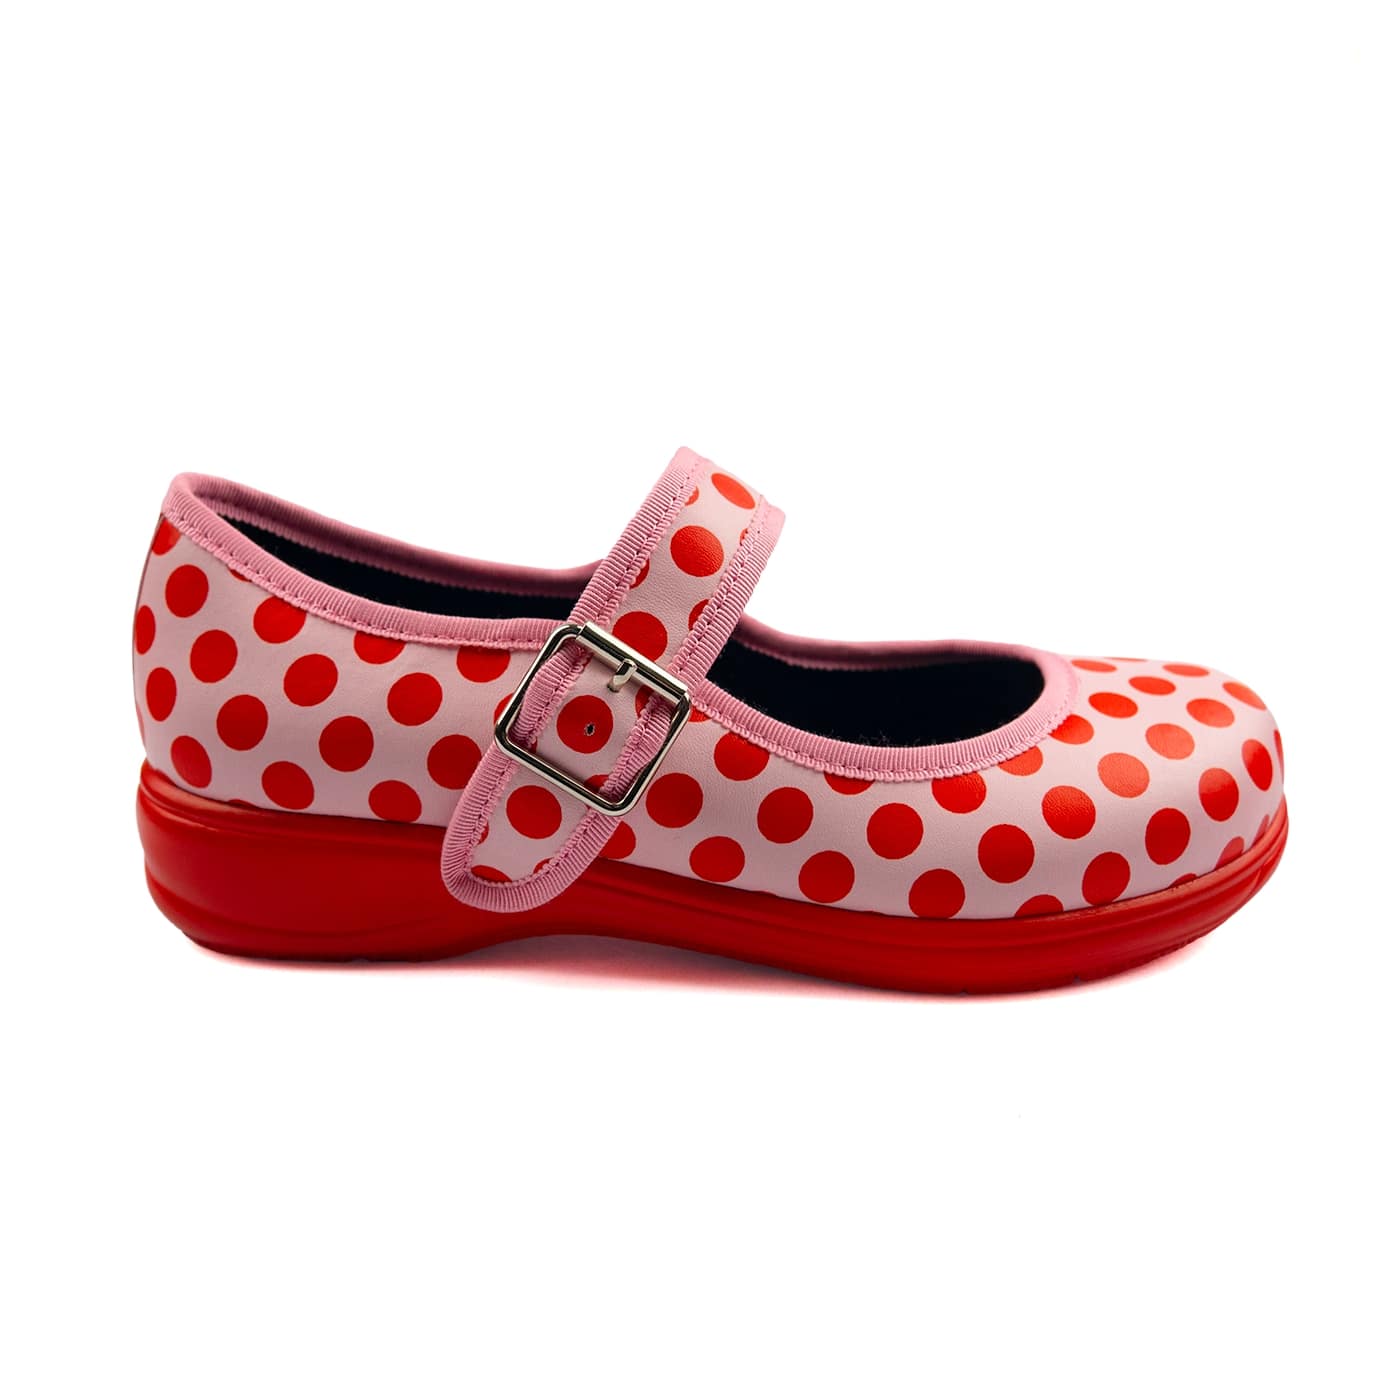 Blush Mary Janes by RainbowsAndFairies.com (Red Polka - Pink Polka - Minnie Mouse - Mismatched Shoes - Buckle Up Shoes - Cute Shoes) - SKU: FW_MARYJ_BLUSH_ORG - Pic 04